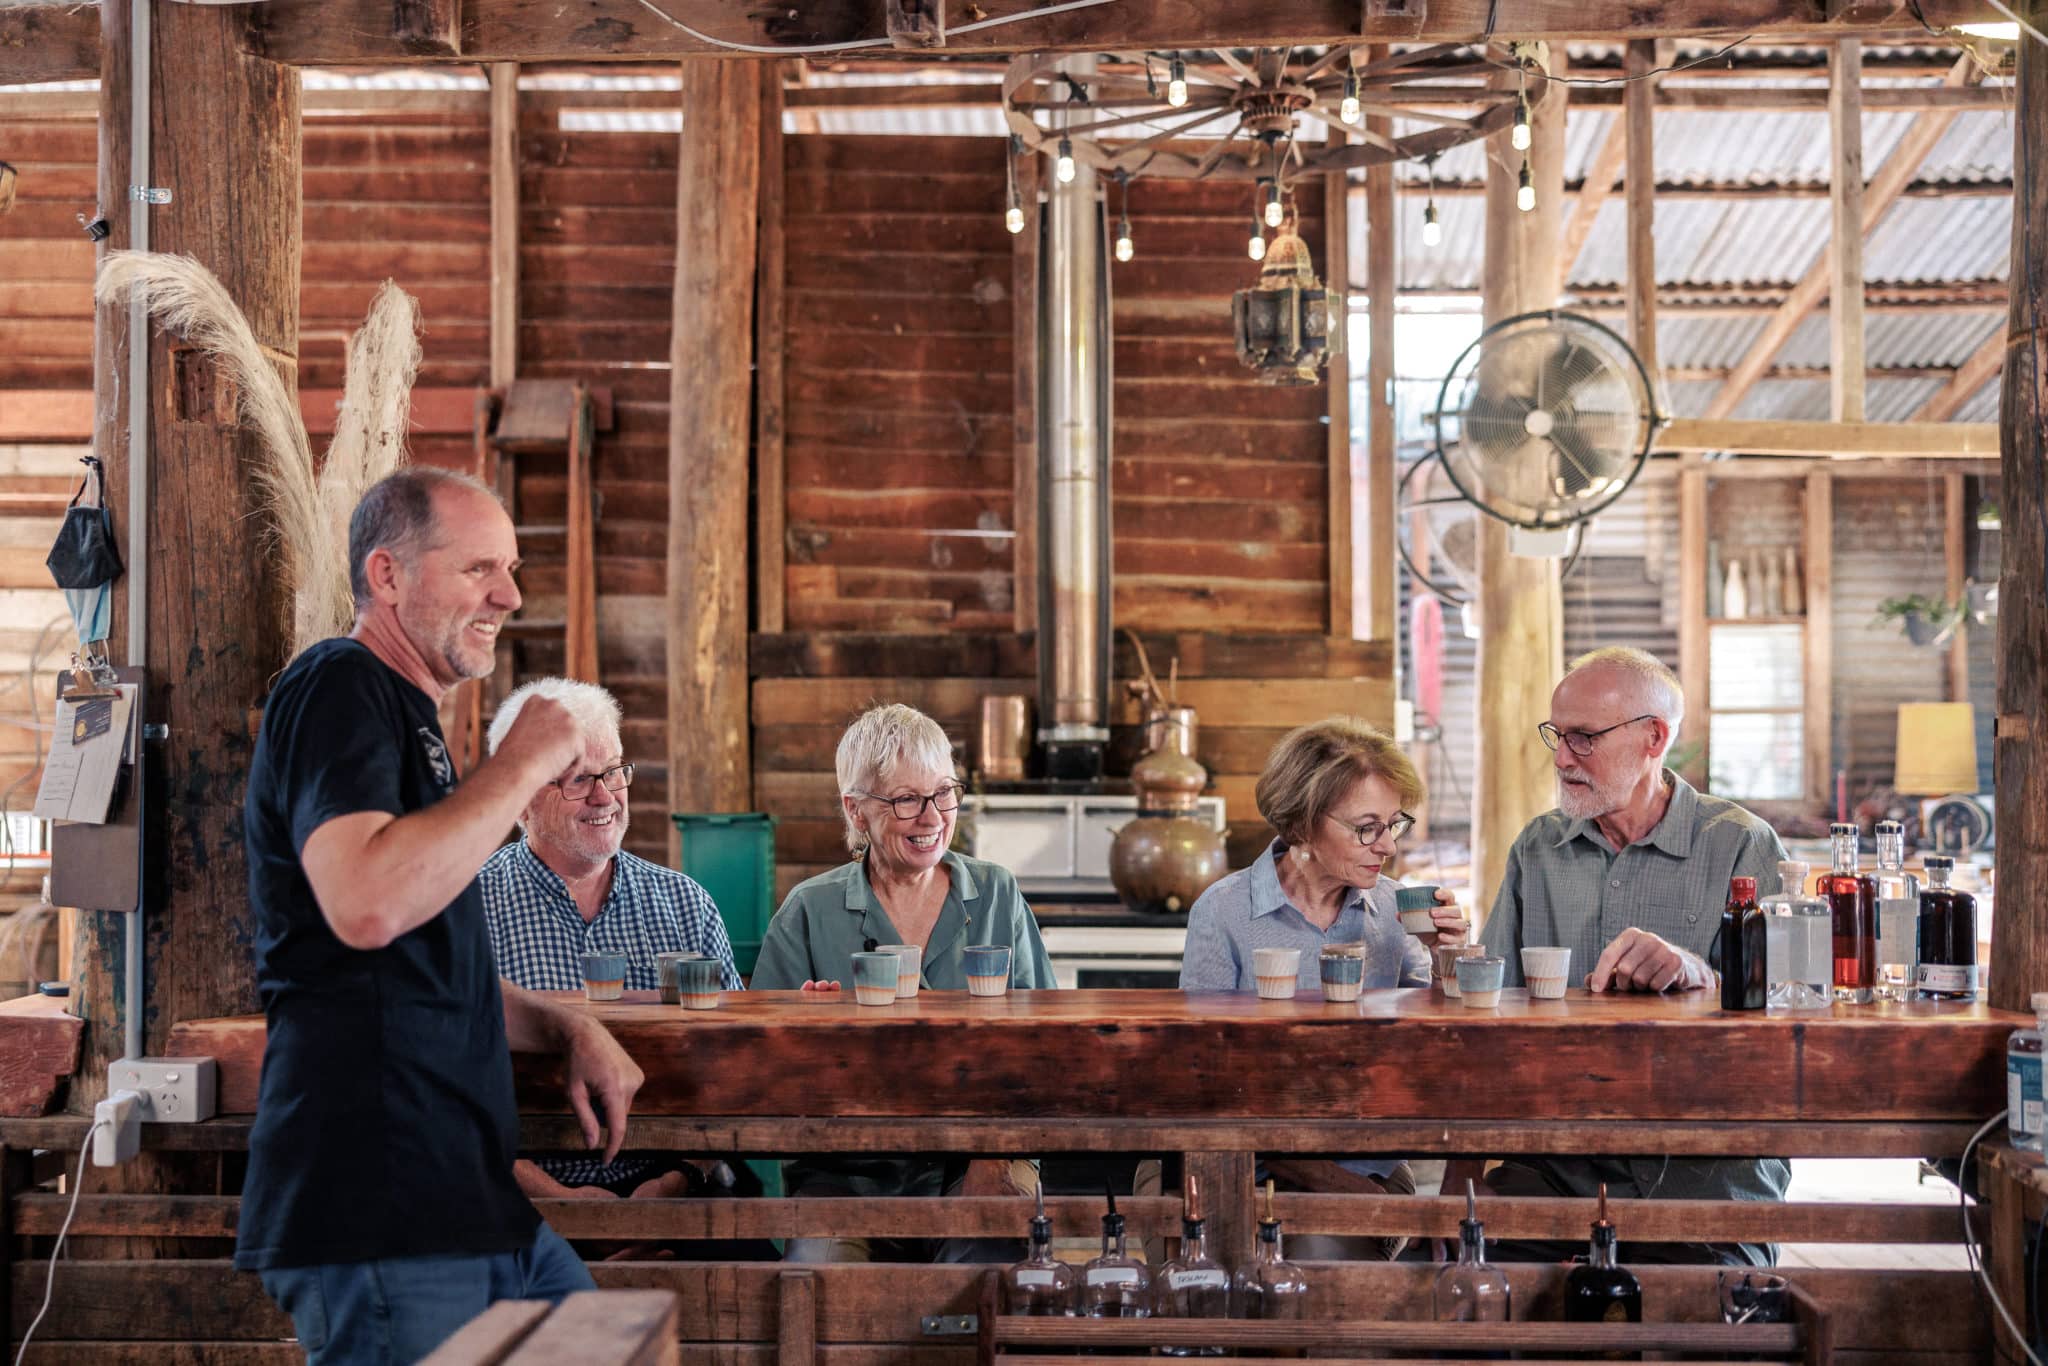 FOUR PEOPLE PARTICIPATING IN A GIN TASTING AT BARKING OWL DISTILLING CO